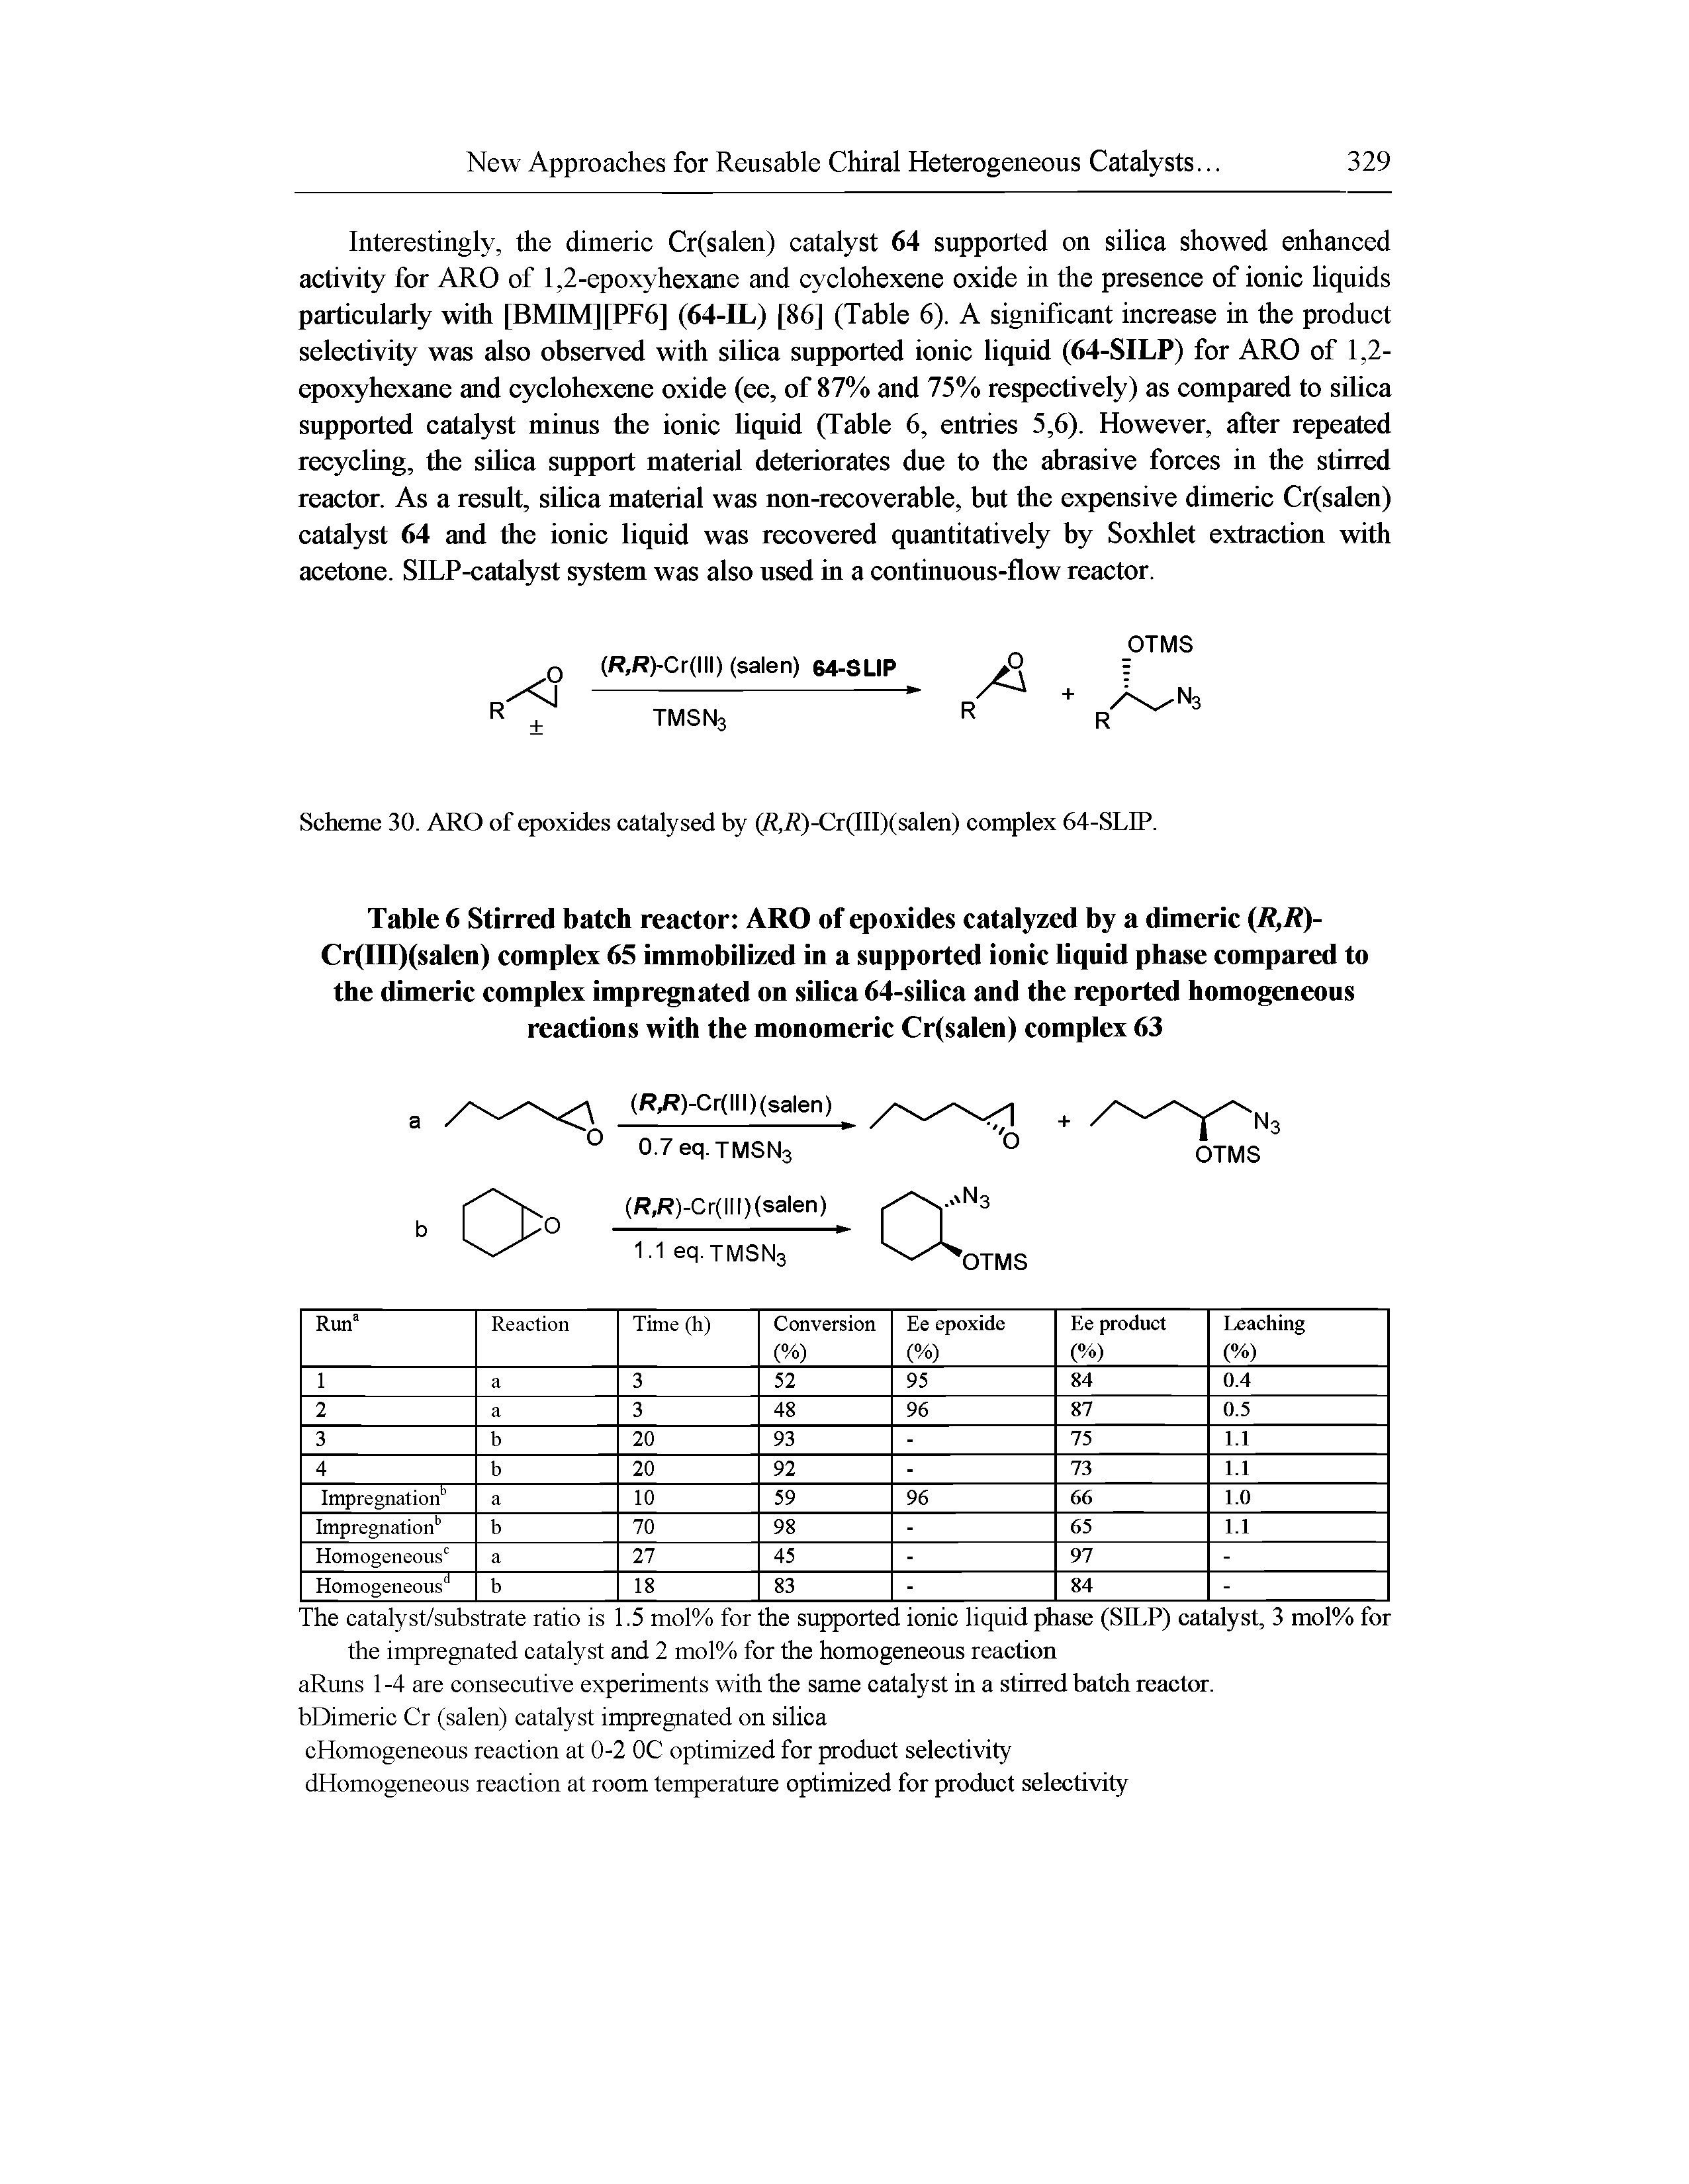 Table 6 Stirred batch reactor ARO of epoxides catalyzed by a dimeric (R,R)-Cr(III)(salen) complex 65 immobilized in a supported ionic liquid phase compared to the dimeric complex impregnated on silica 64-silica and the reported homogeneous reactions with the monomeric Cr(salen) complex 63...